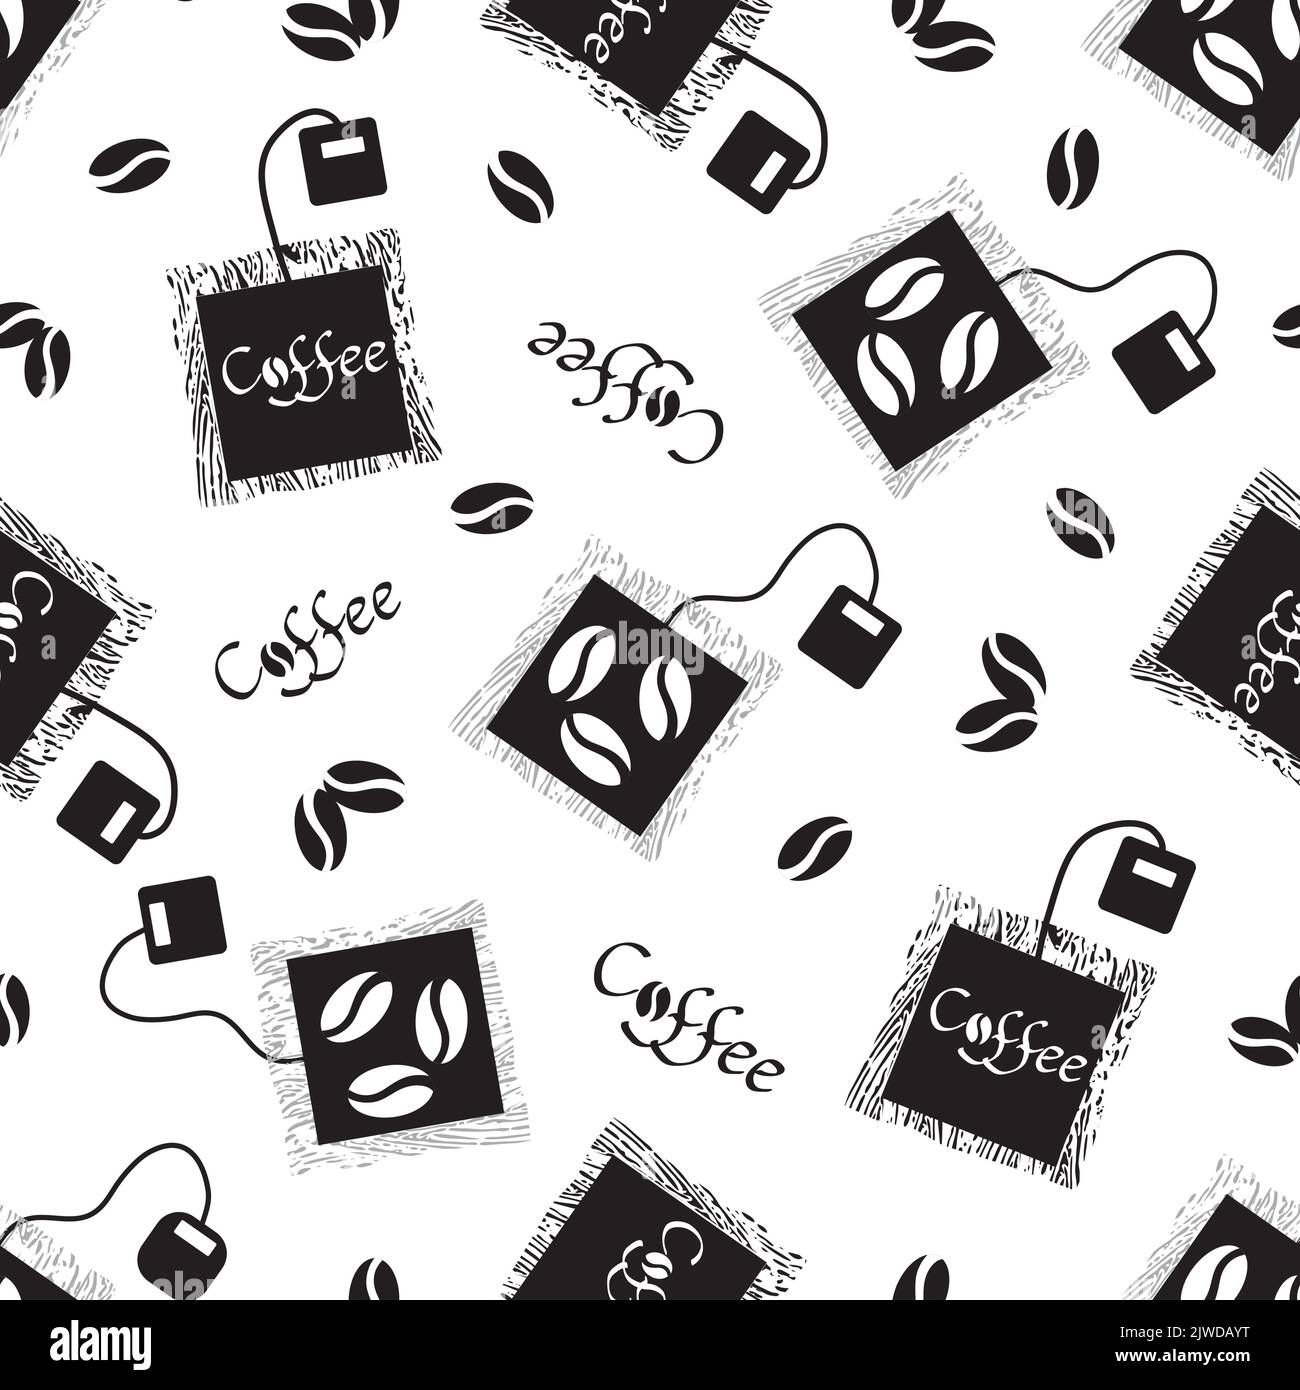 Coffee bag and beans vector seamless pattern background. Black white backdrop with disposable freshly brewed sachets of lattes, americanos. Grunge Stock Vector